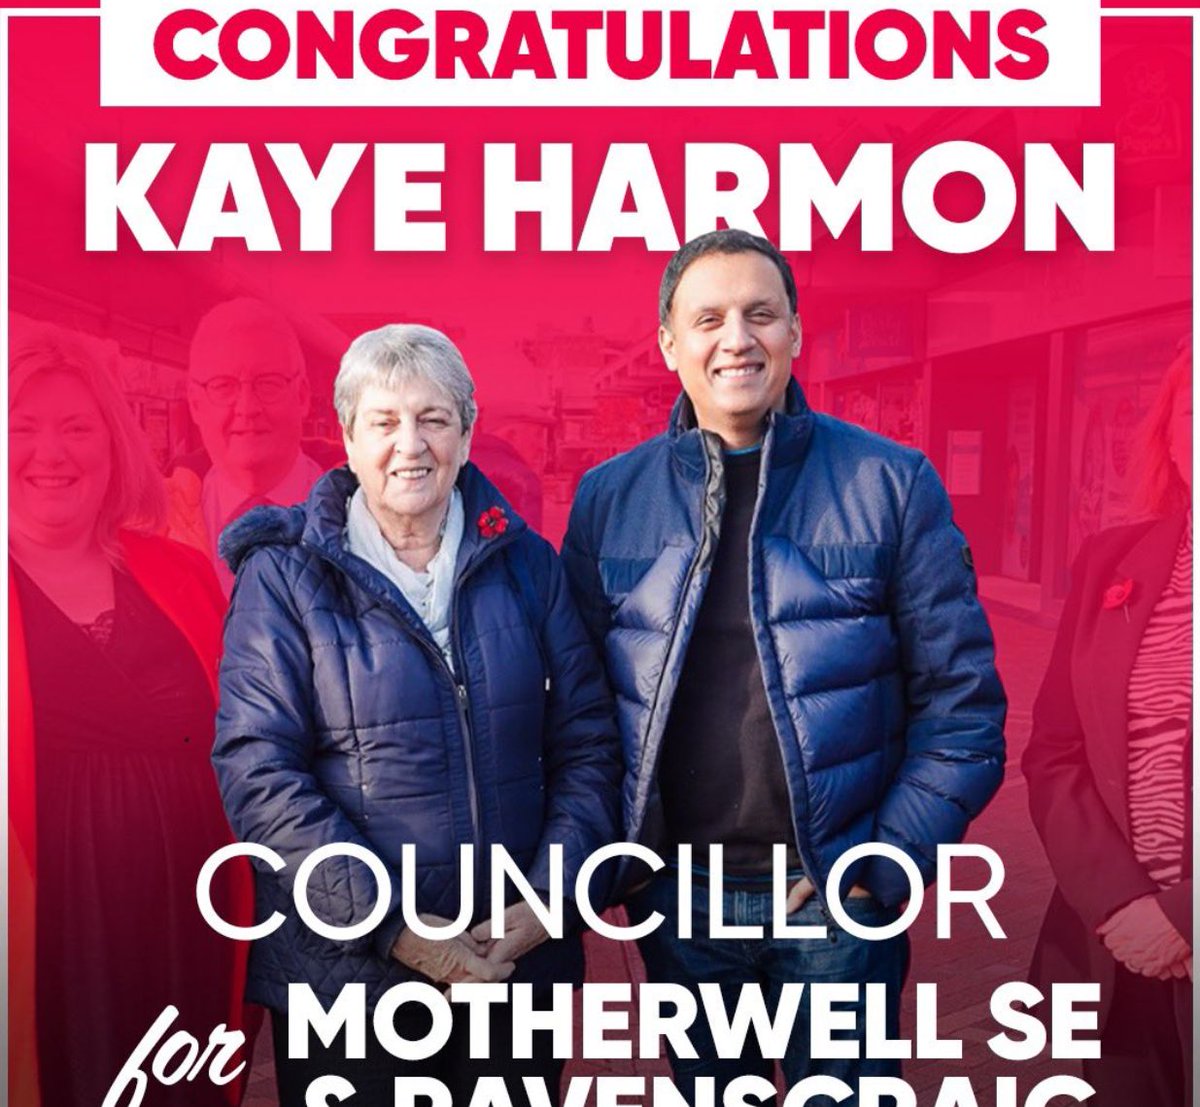 Congratulations to Scottish Labour's newest Cllr Kaye Harmon. Change is coming. 💪🌹